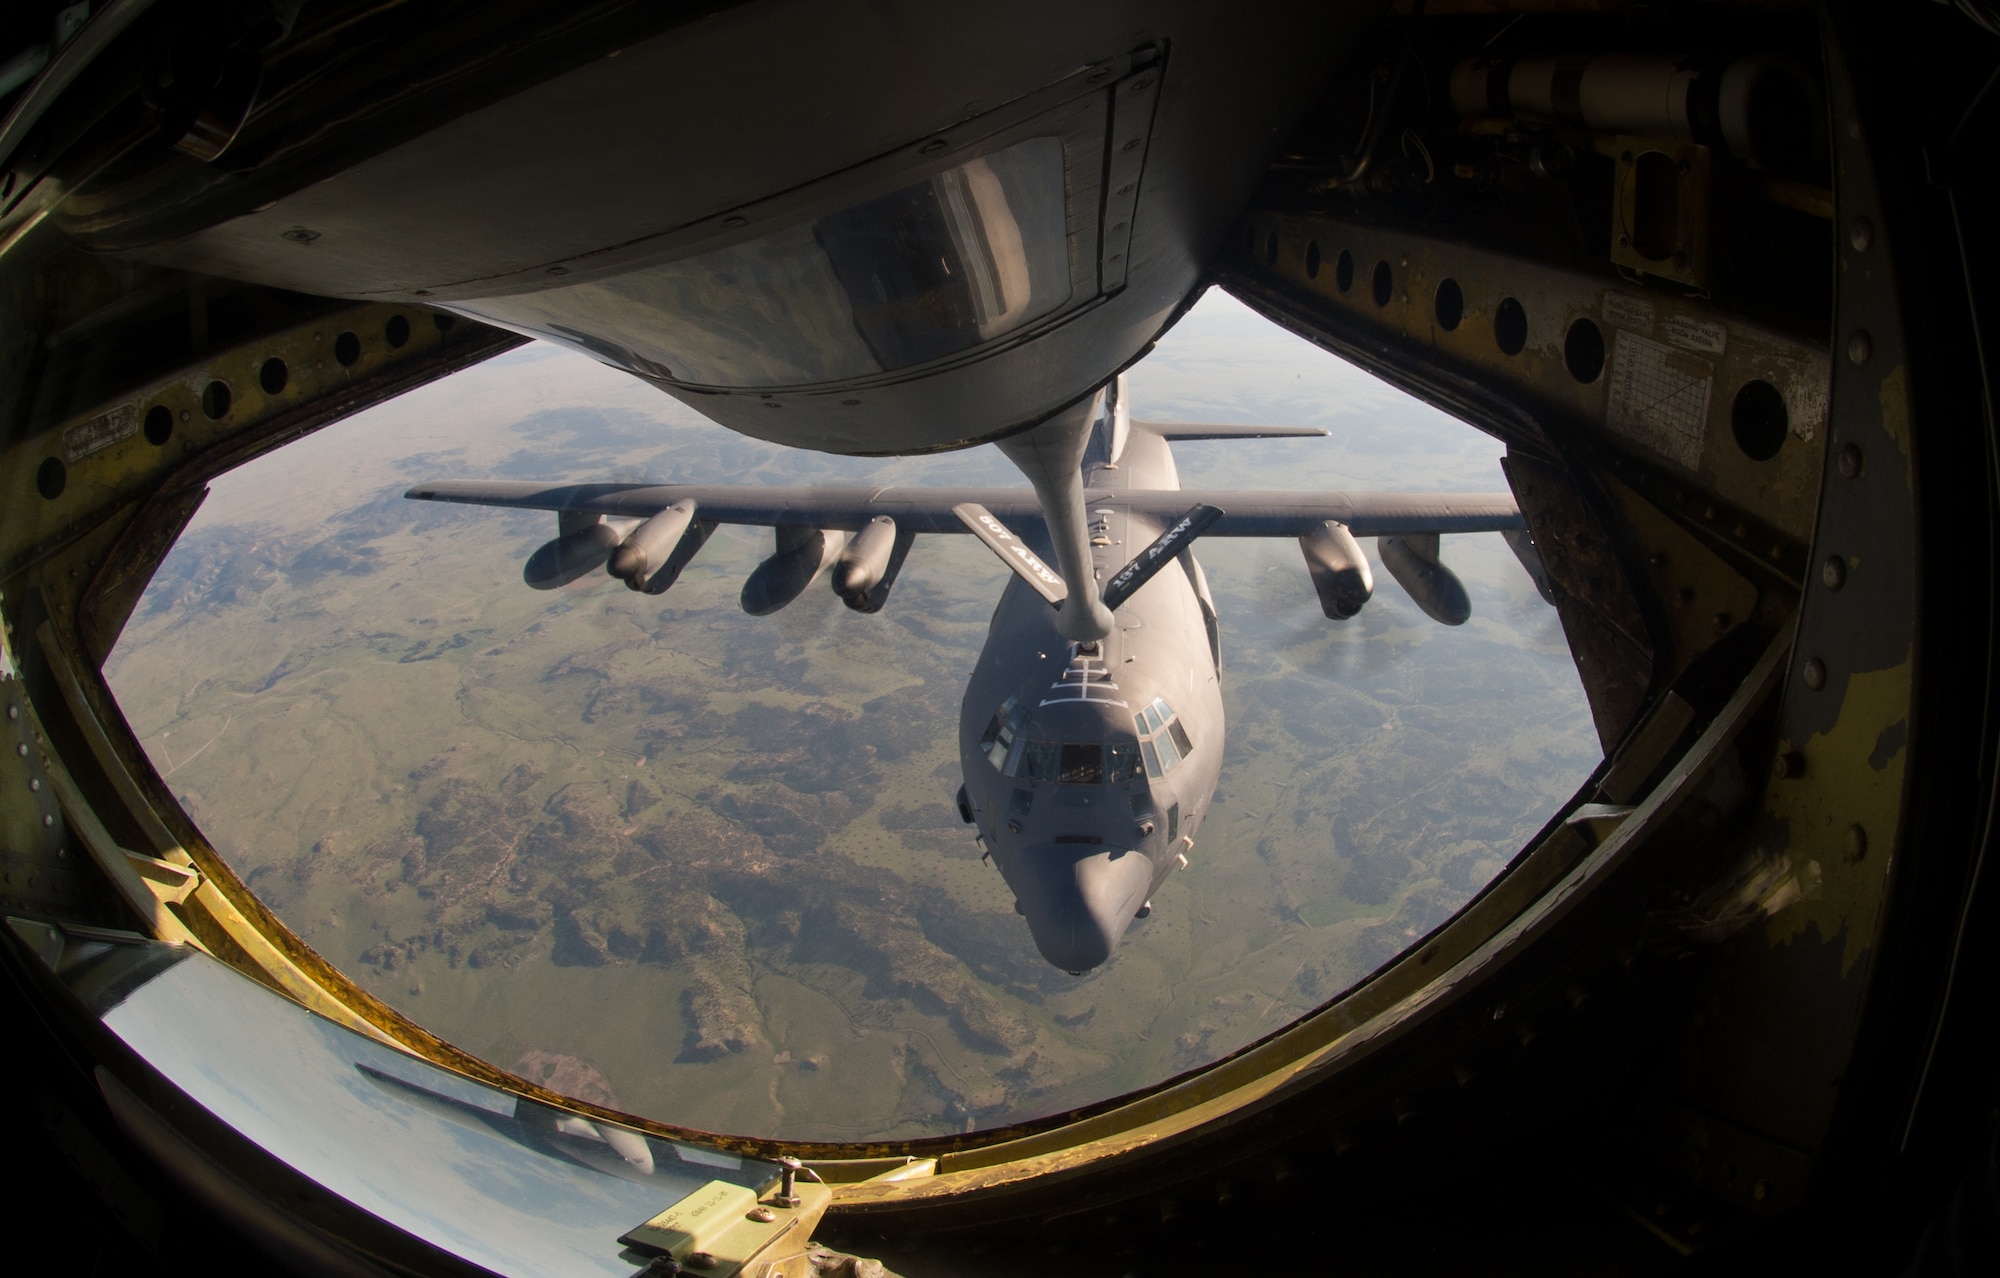 A U.S. Air Force KC-135 Stratotanker assigned to the 185th Air Refueling Squadron refuels a MC-130J Combat Talon assigned to the 58th Special Operations Wing during a final training mission of the 185 ARS June 30, 2015. The 185 ARS will be transitioning to Air Force Special Operations Command. (U.S. Air National Guard photo by Tech Sgt. Caroline Essex/Released)